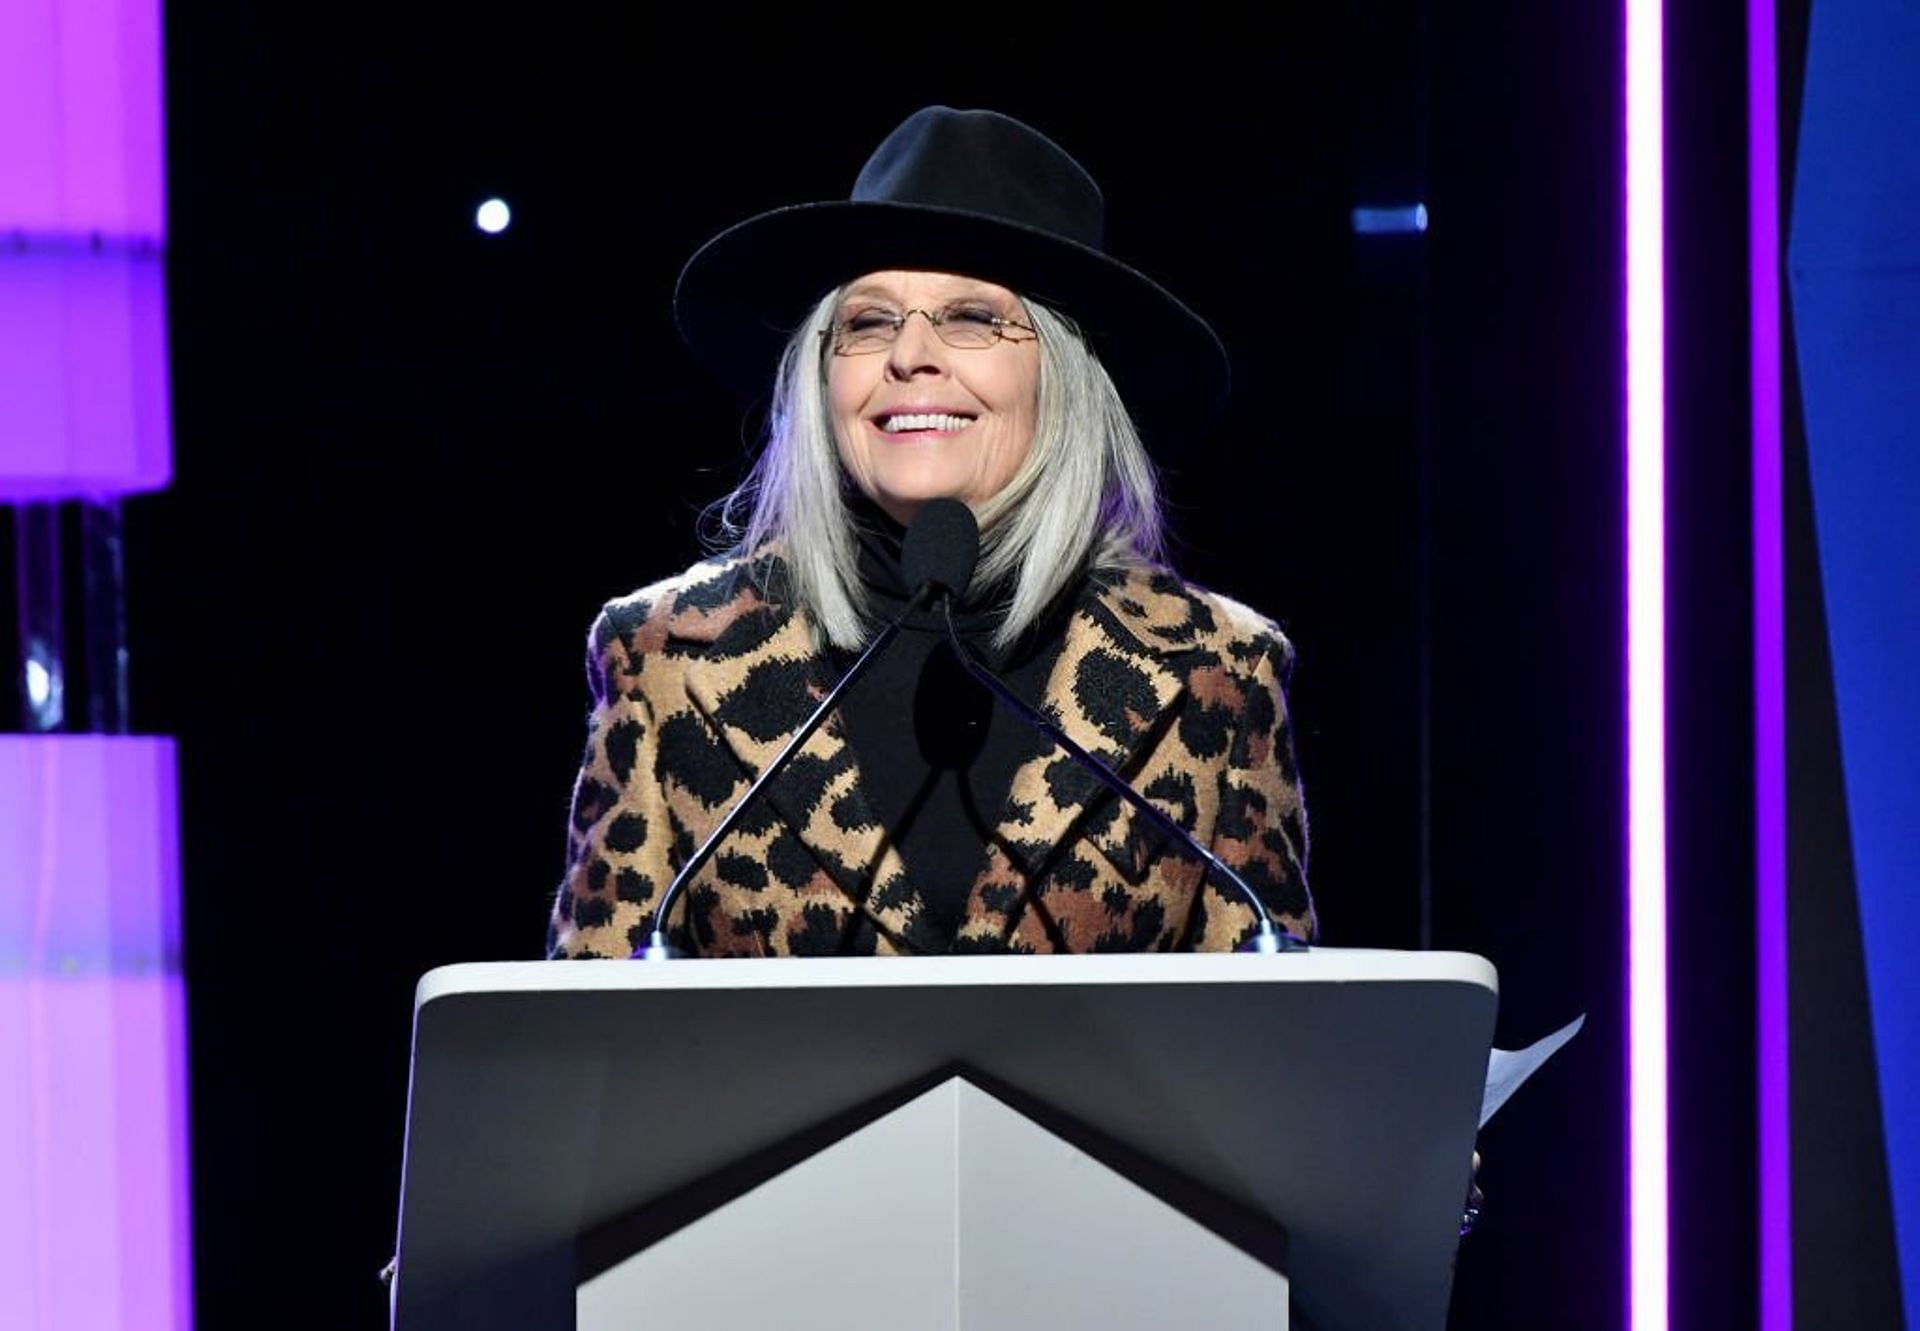 Diane Keaton speaks onstage during the 2020 Writers Guild Awards West Coast Ceremony (Image via Amy Sussman/Getty Images)